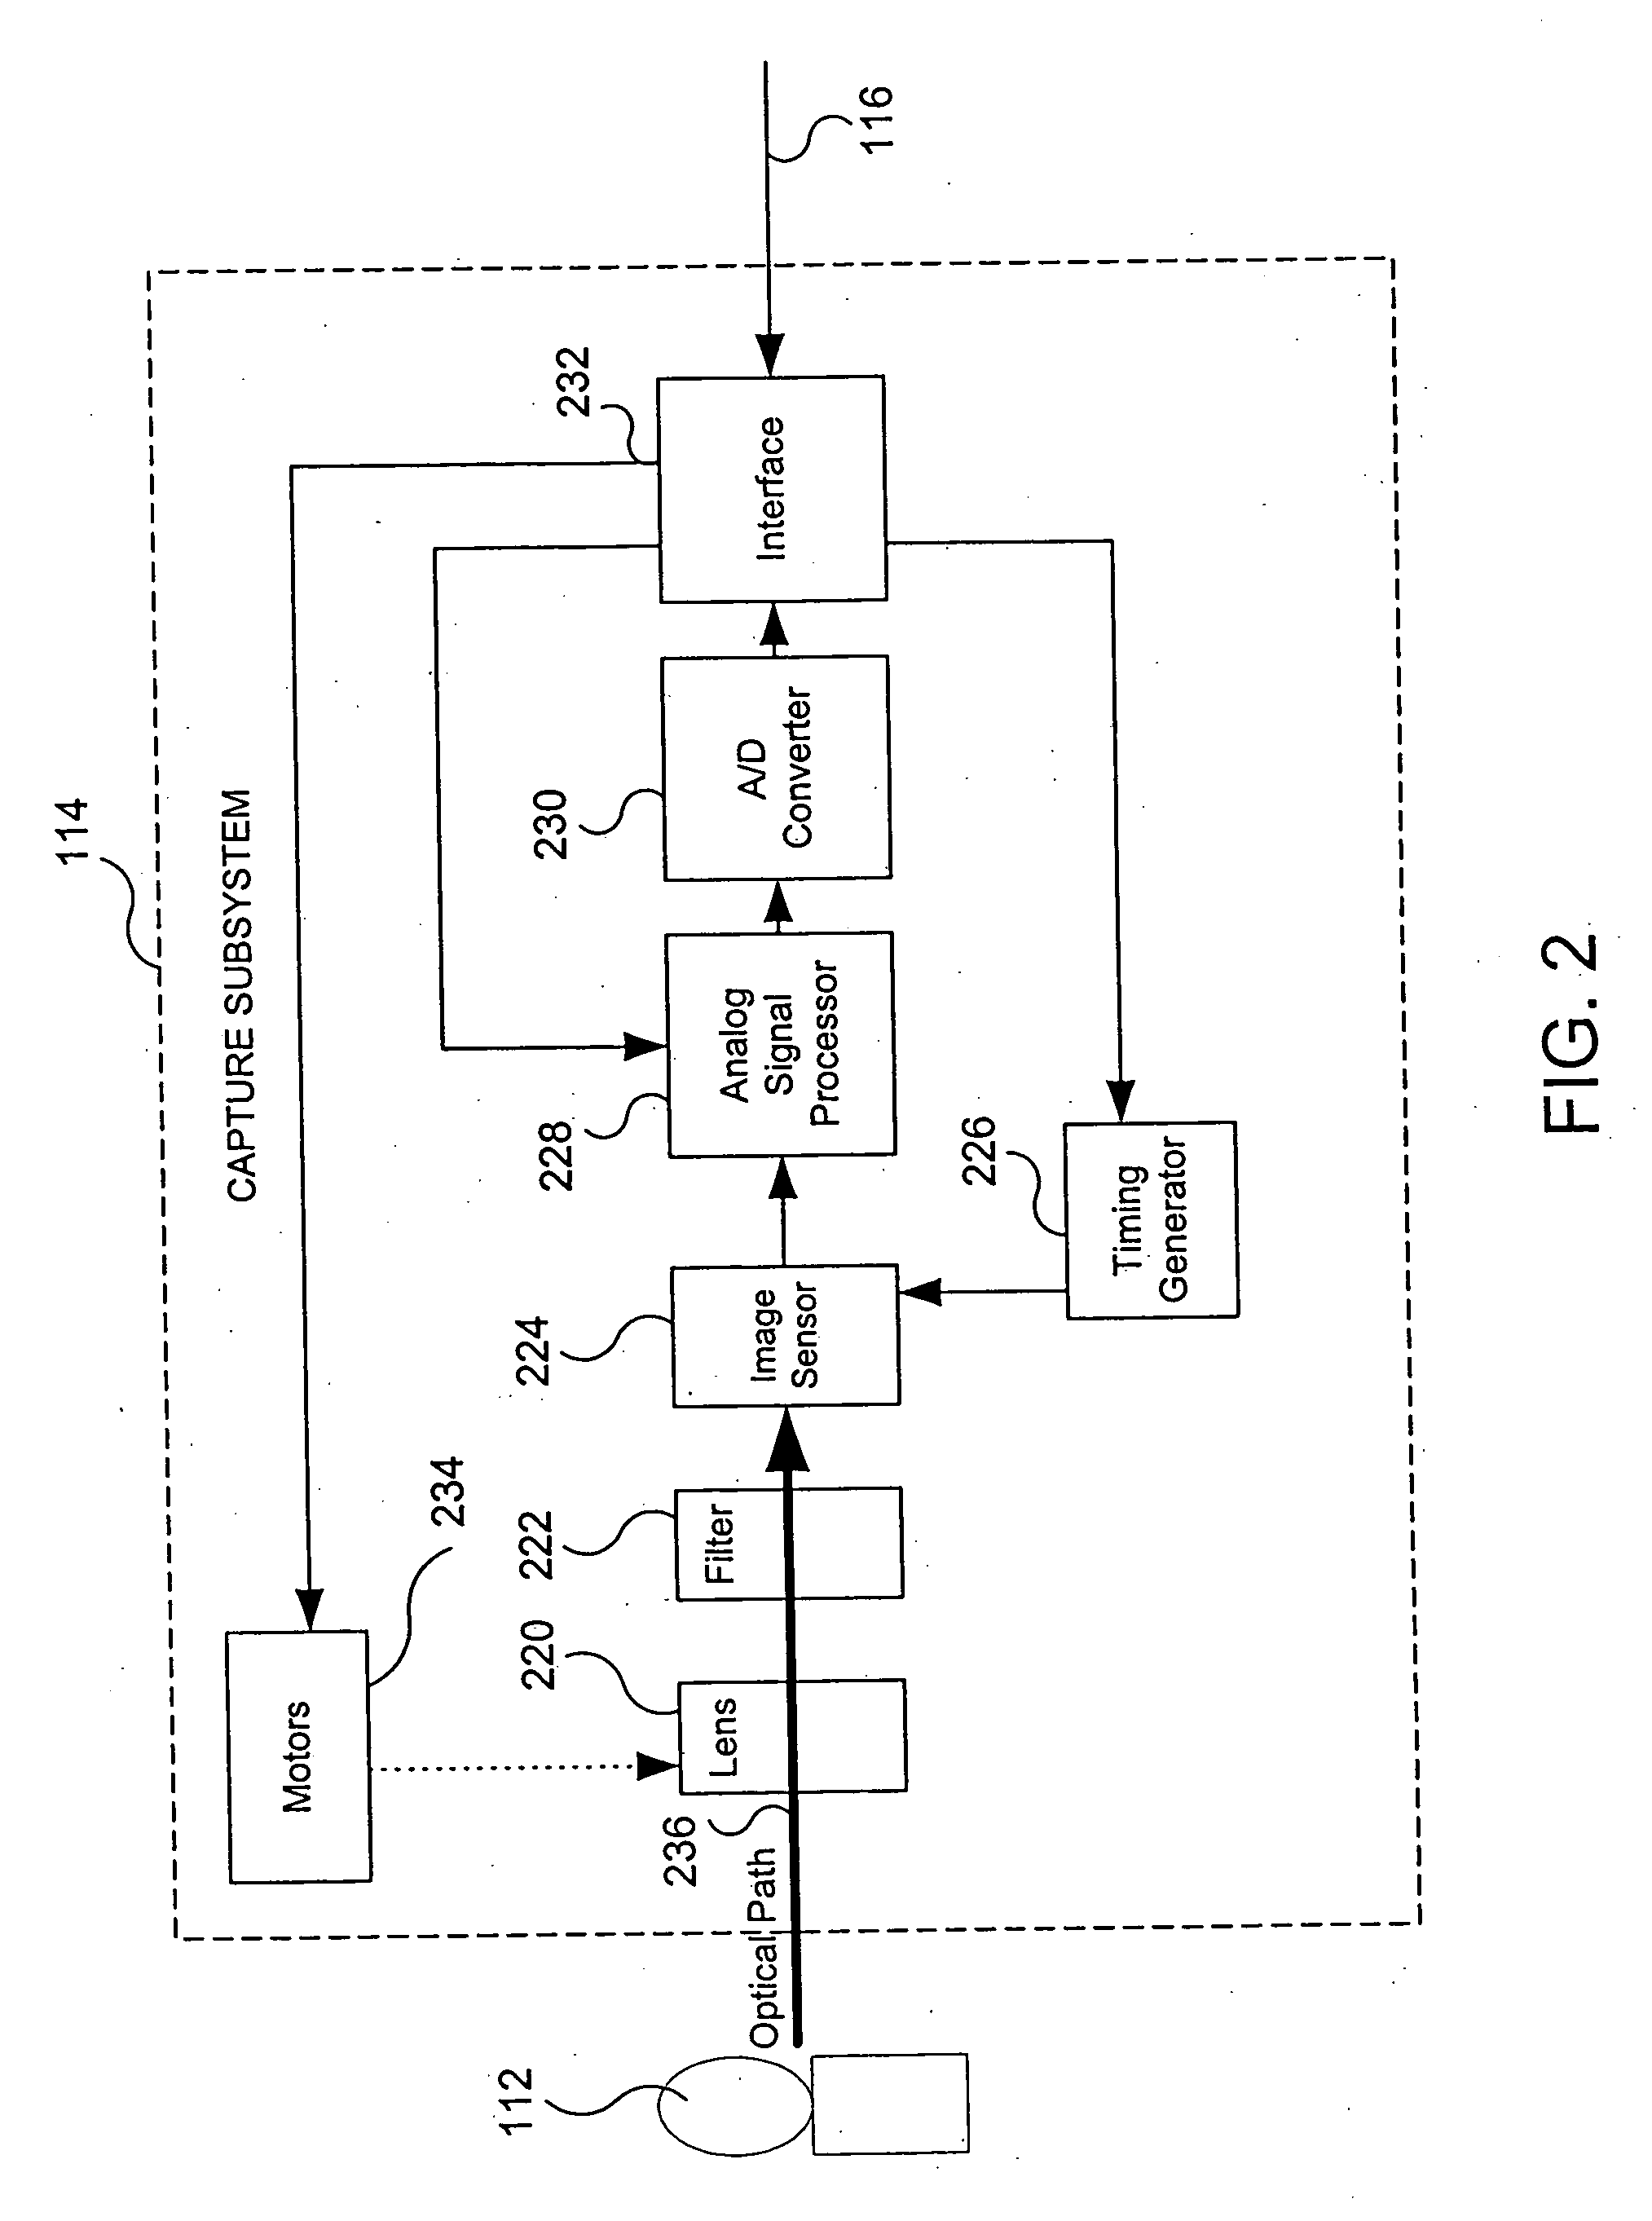 System and method for creating composite images by utilizing an imaging device